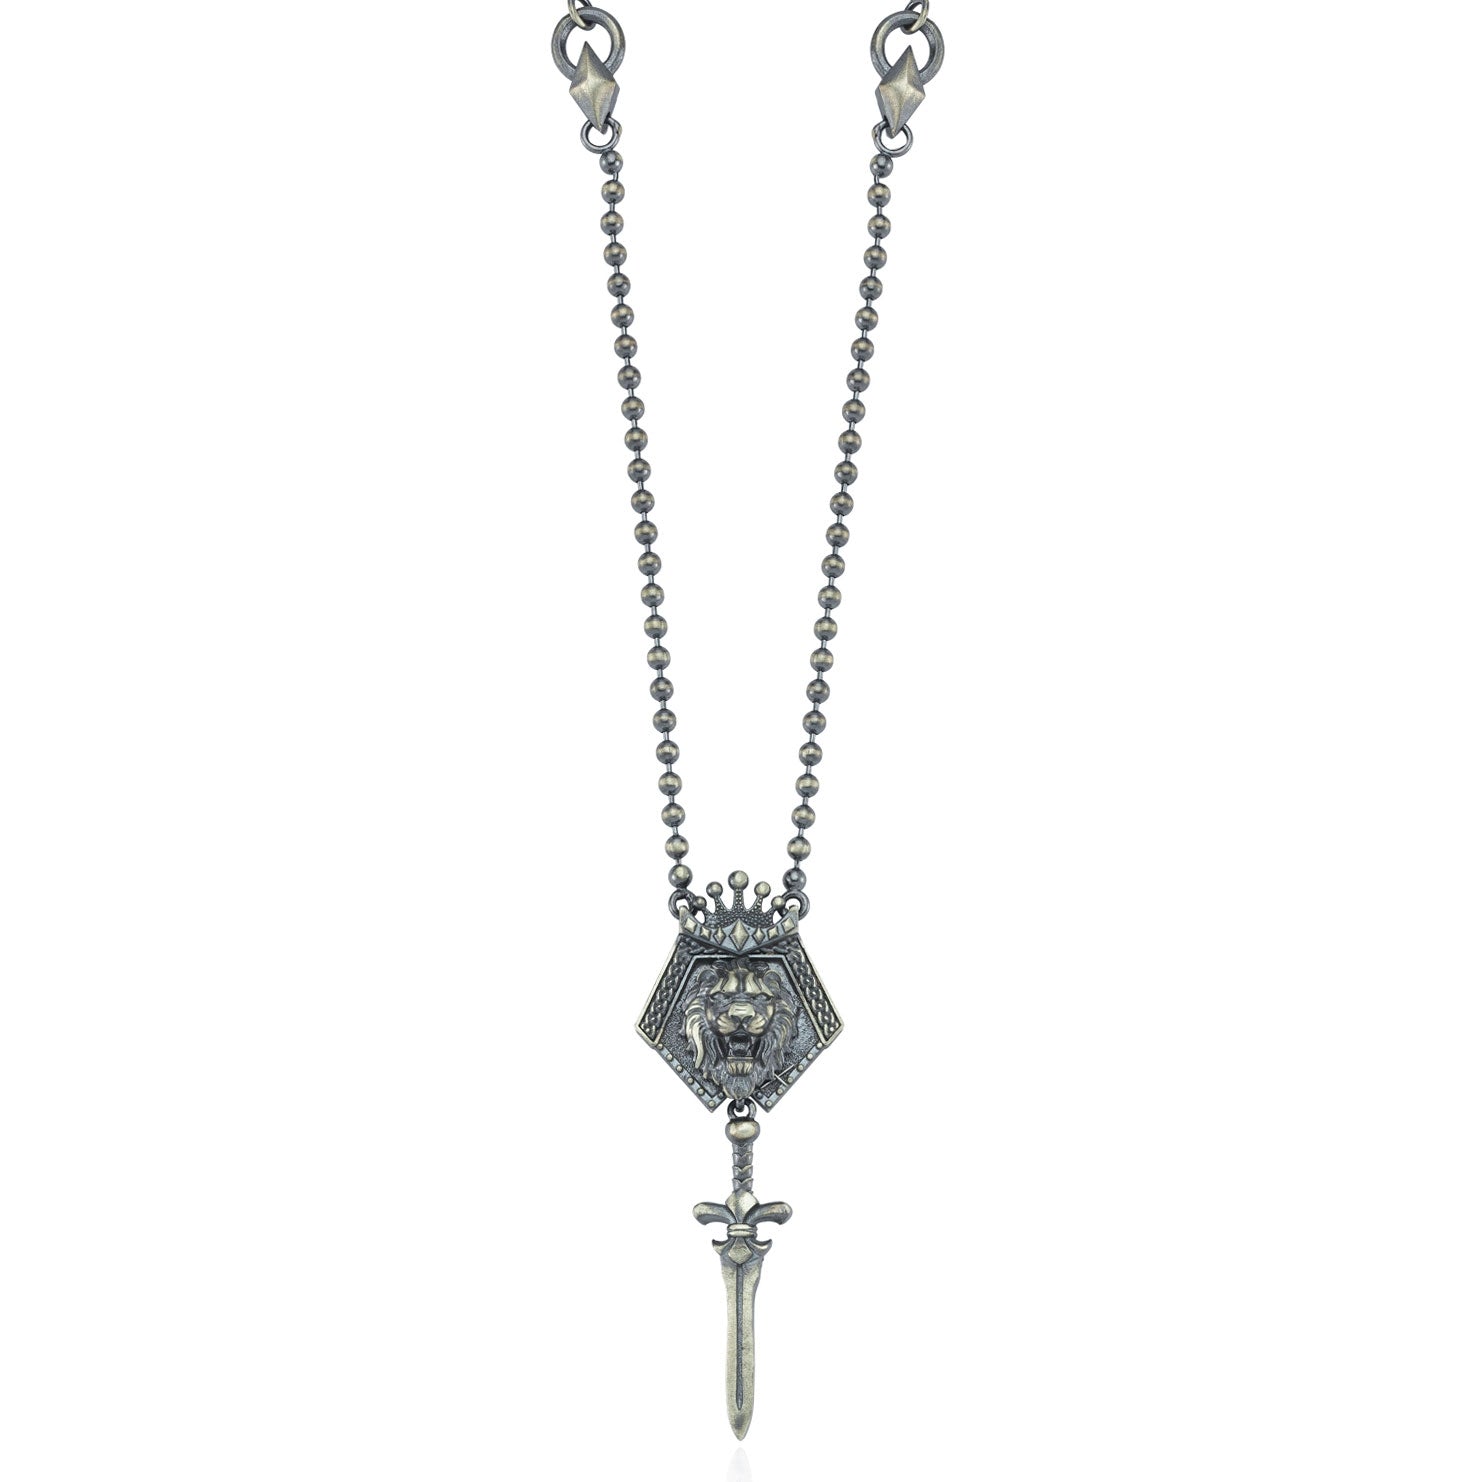 RARE PRINCE by CARAT SUTRA | Unique Designed King Lion with Sword Pendant Necklace with Ball Chain | 925 Sterling Silver Oxidized Necklace | Men's Jewelry | With Certificate of Authenticity and 925 Hallmark - caratsutra